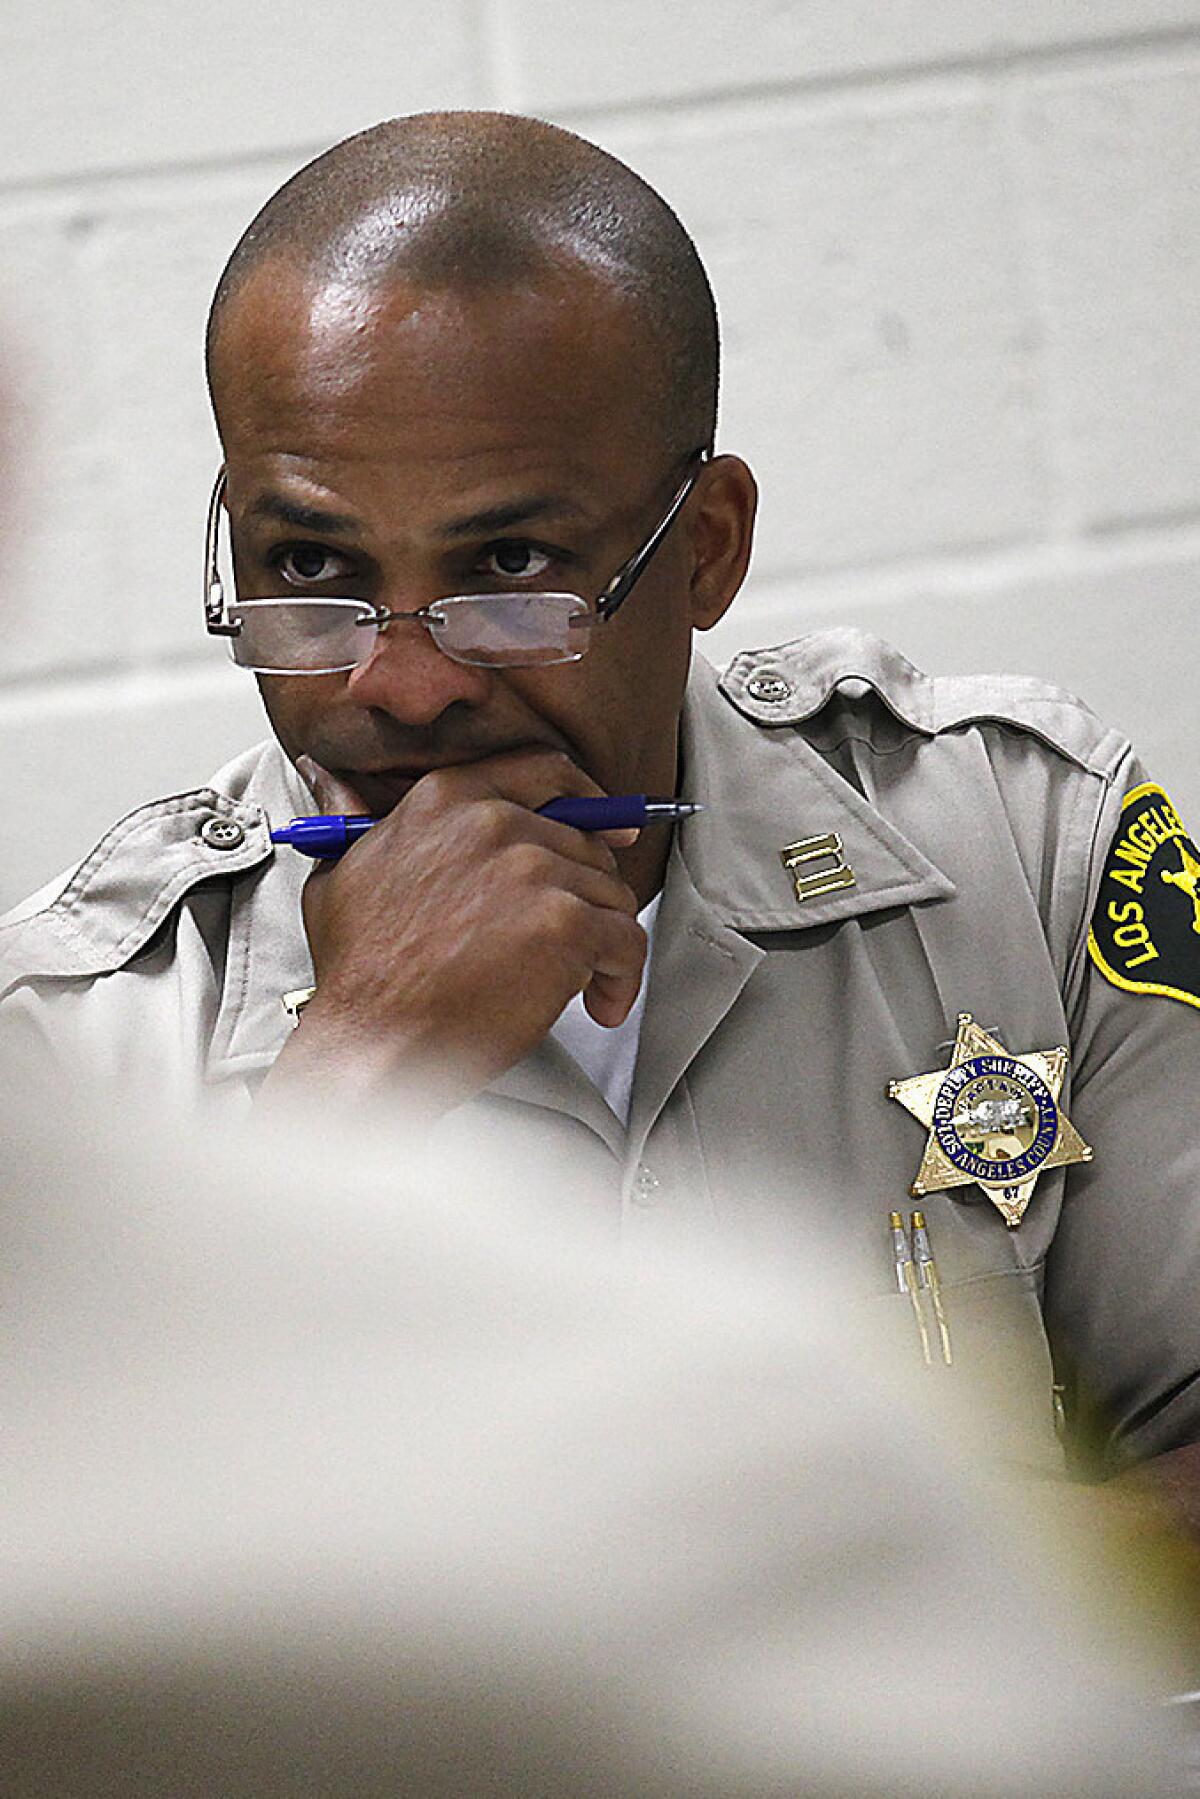 Los Angeles County Sheriff's Department Cmdr. Roosevelt Johnson was recently elevated from the Santa Clarita Valley station, where he was captain. He was given a month-long suspension for making false statements in 1999, according to documents reviewed by The Times.